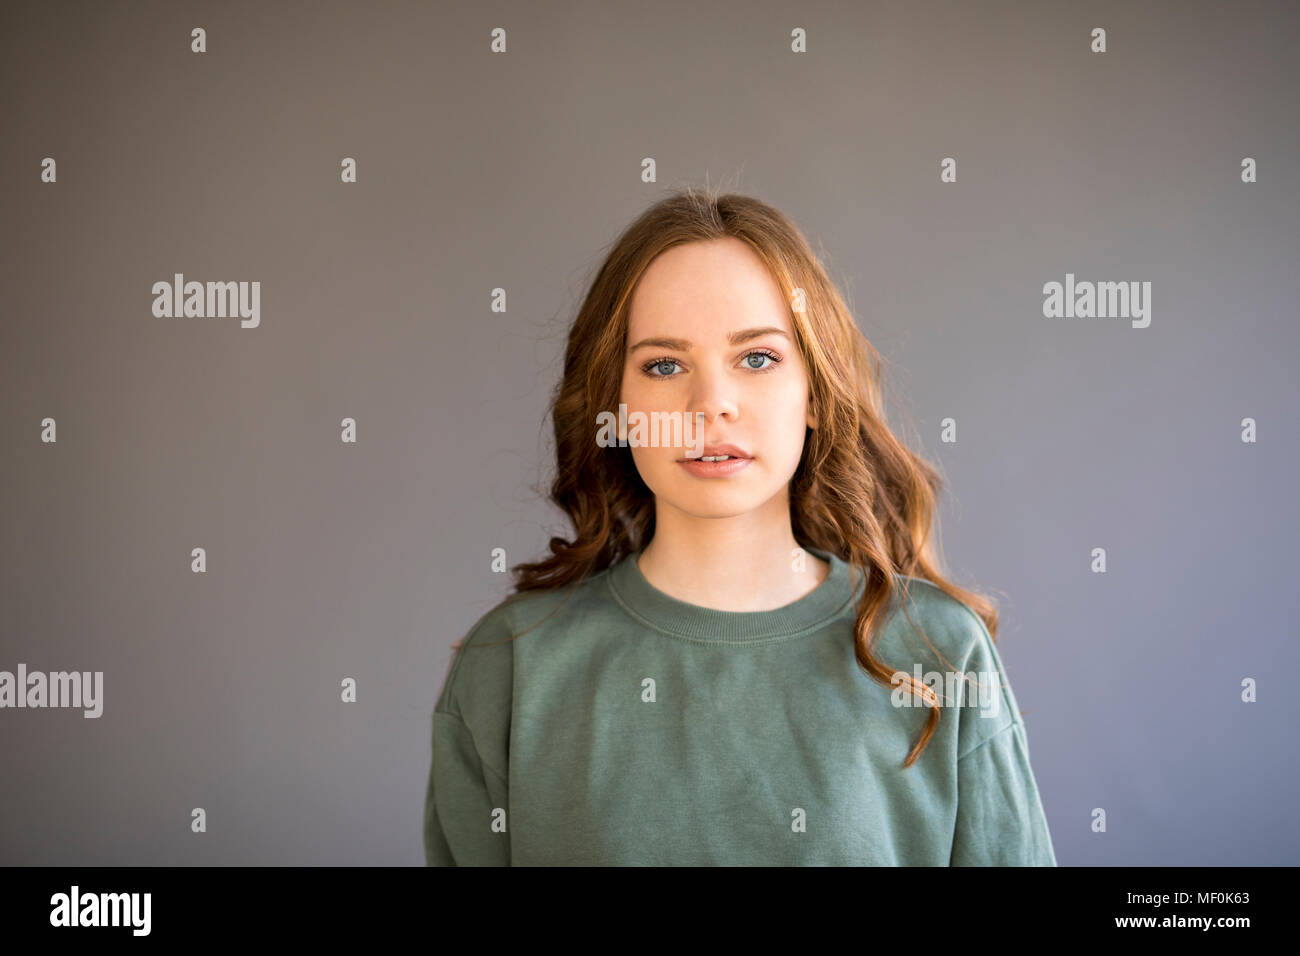 Portrait of a teenage girl, looking at camera Stock Photo